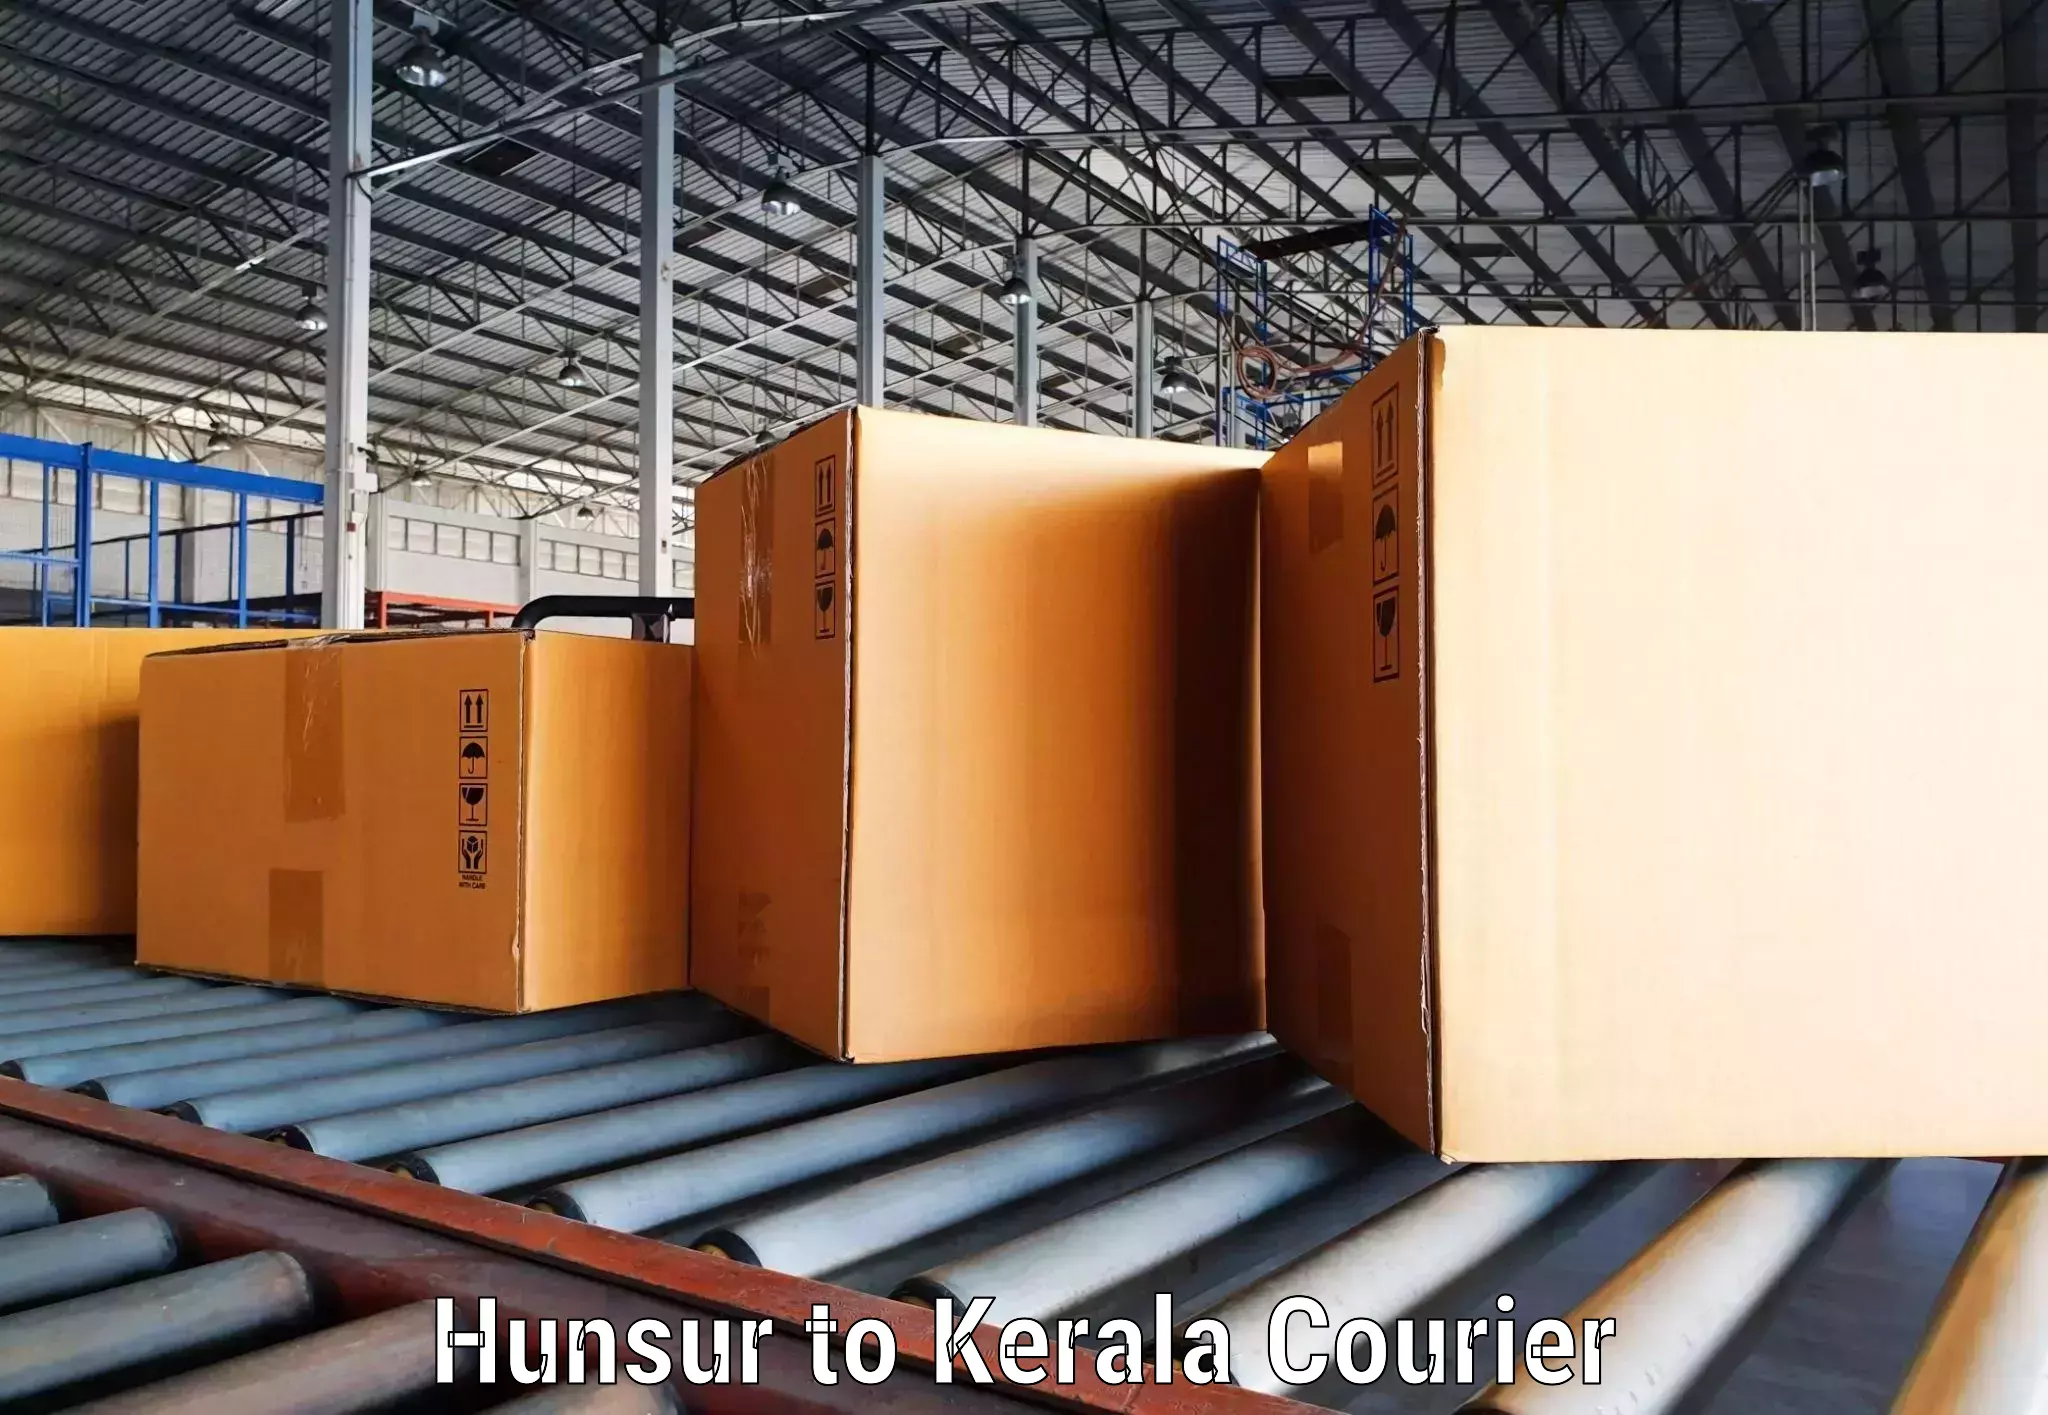 Automated shipping processes in Hunsur to Kerala